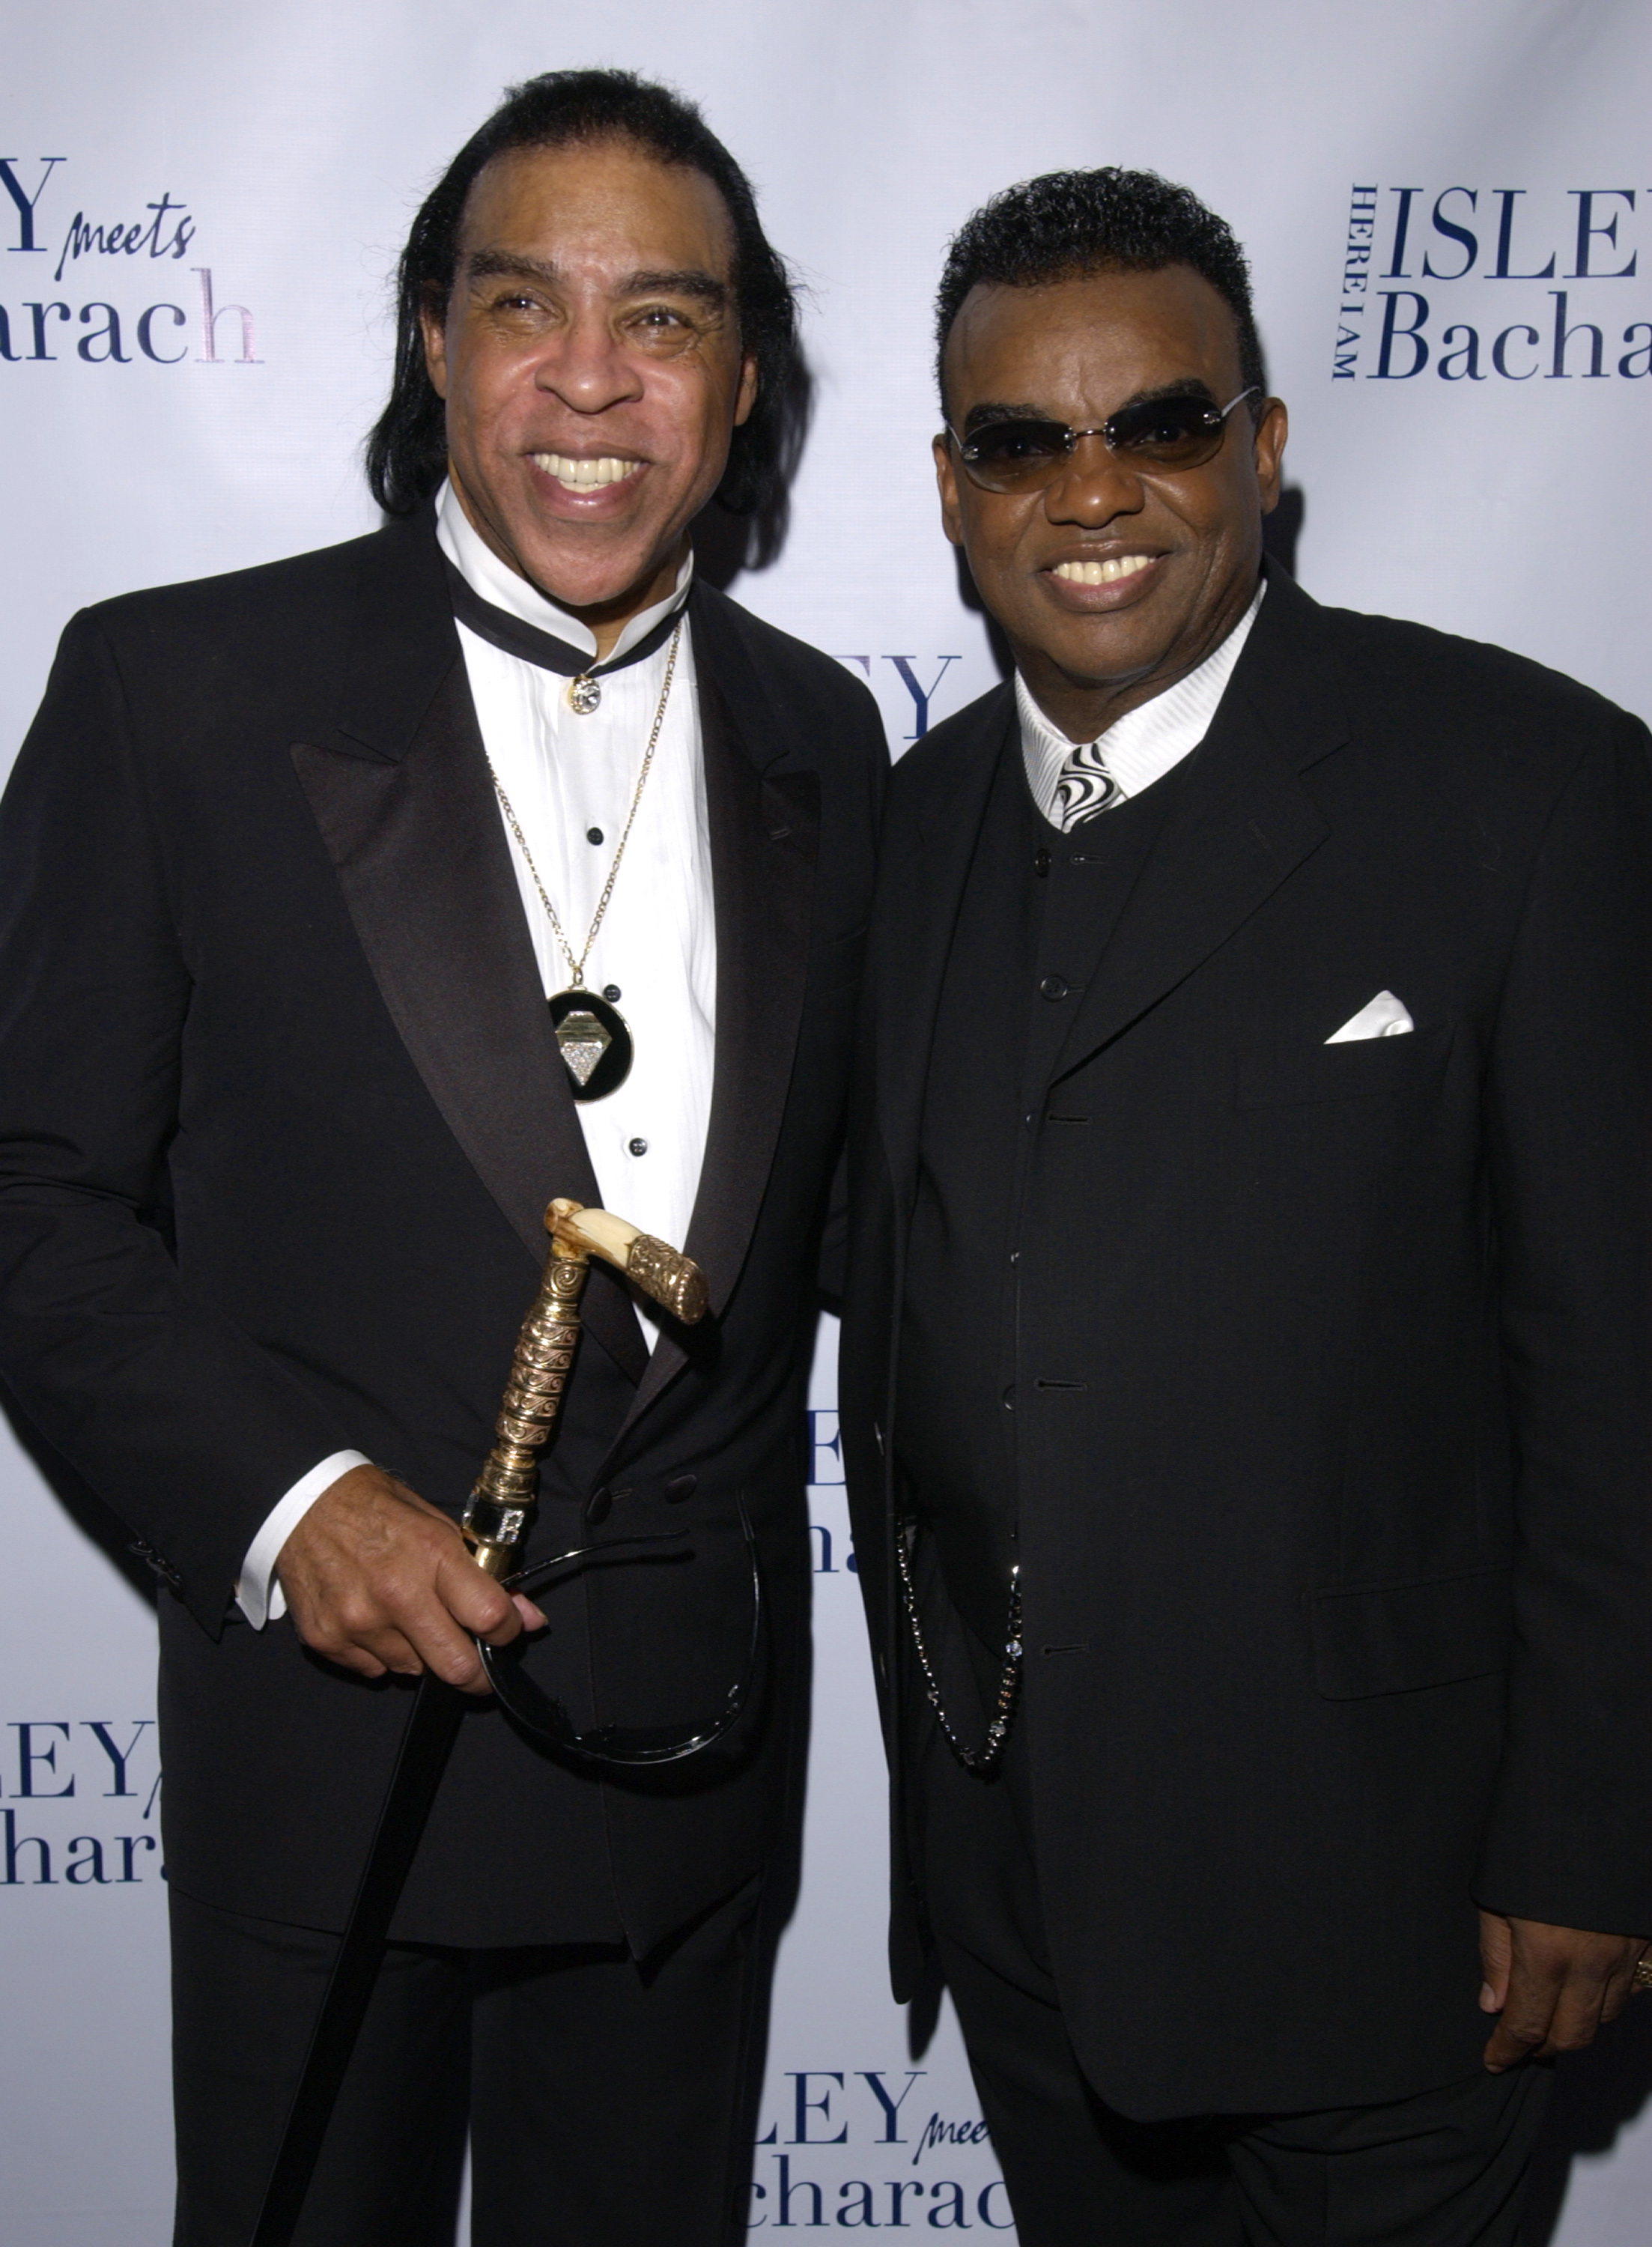 Rudolph and Ronald Isley at the "Isley Meets Bacharach" Record Release Party in New York City in 2003 | Source: Getty Images